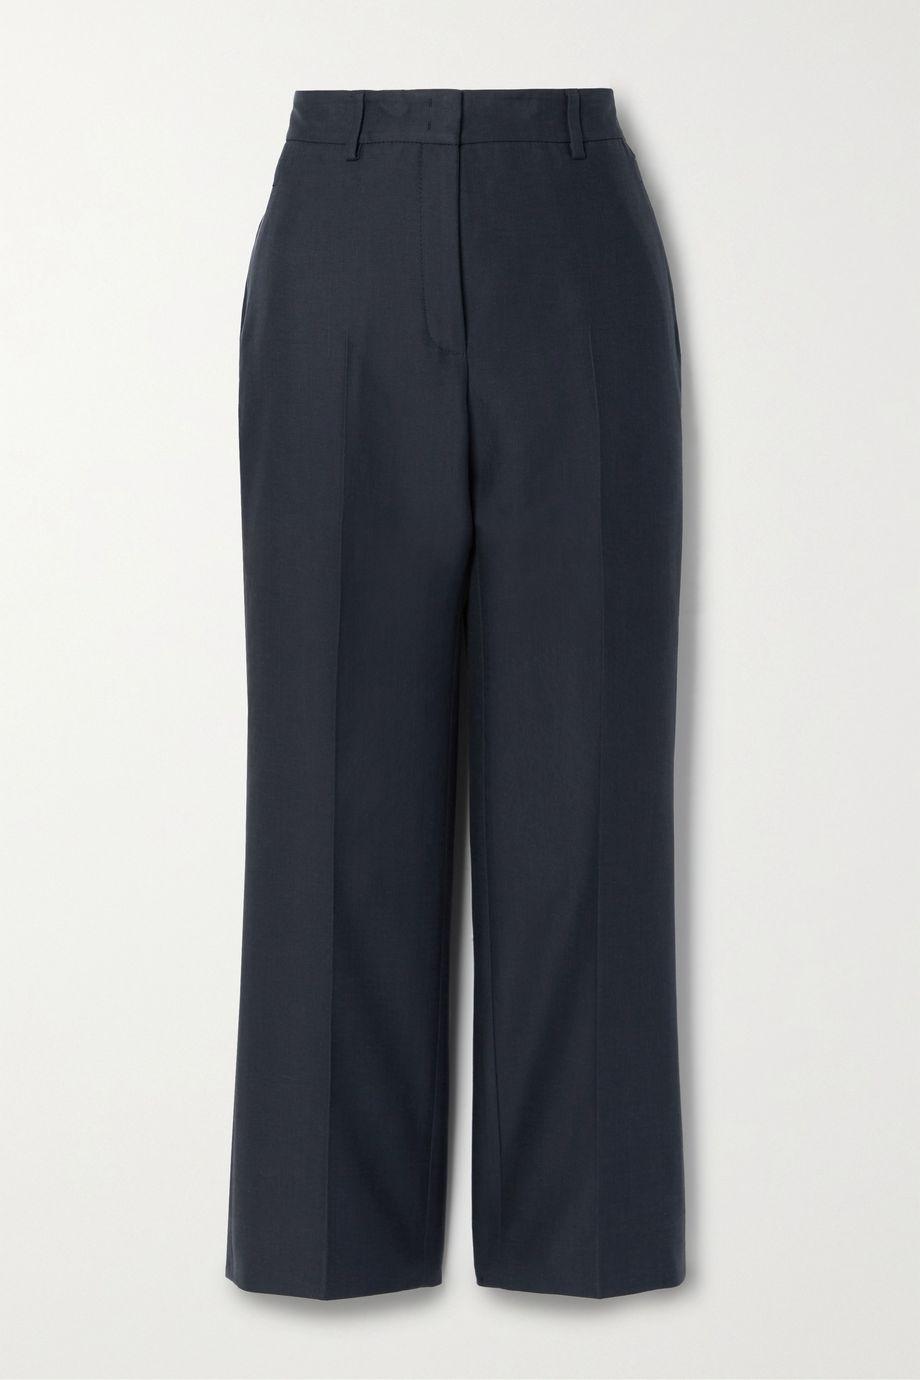 Flow cotton-blend tapered pants by AKRIS